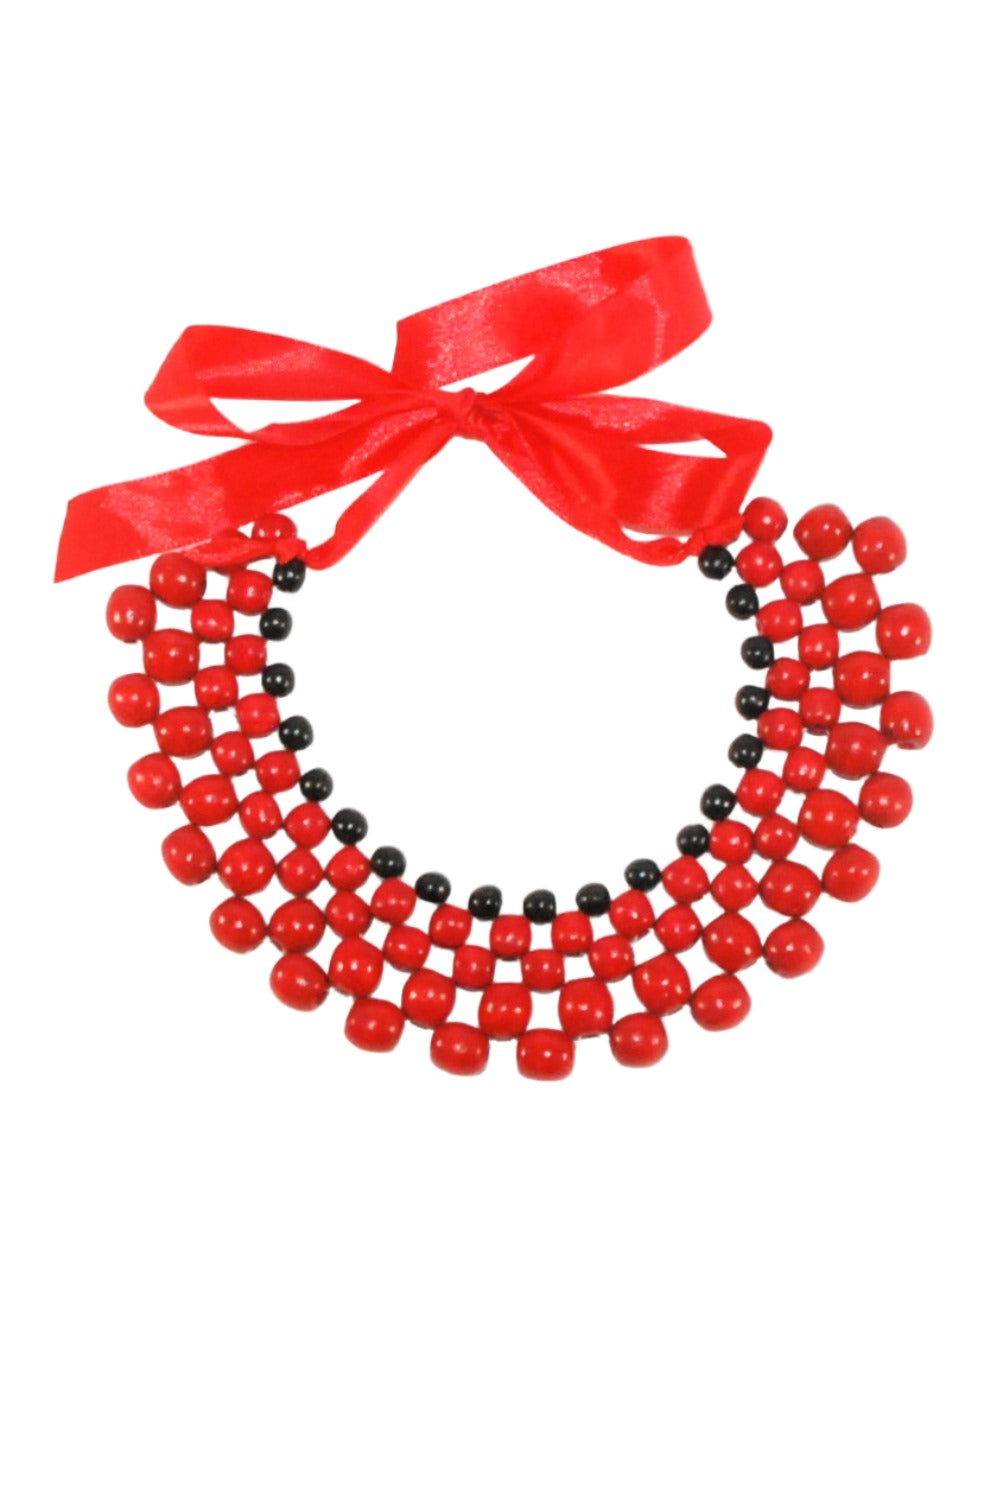 Artisan crafted wood bib necklace.